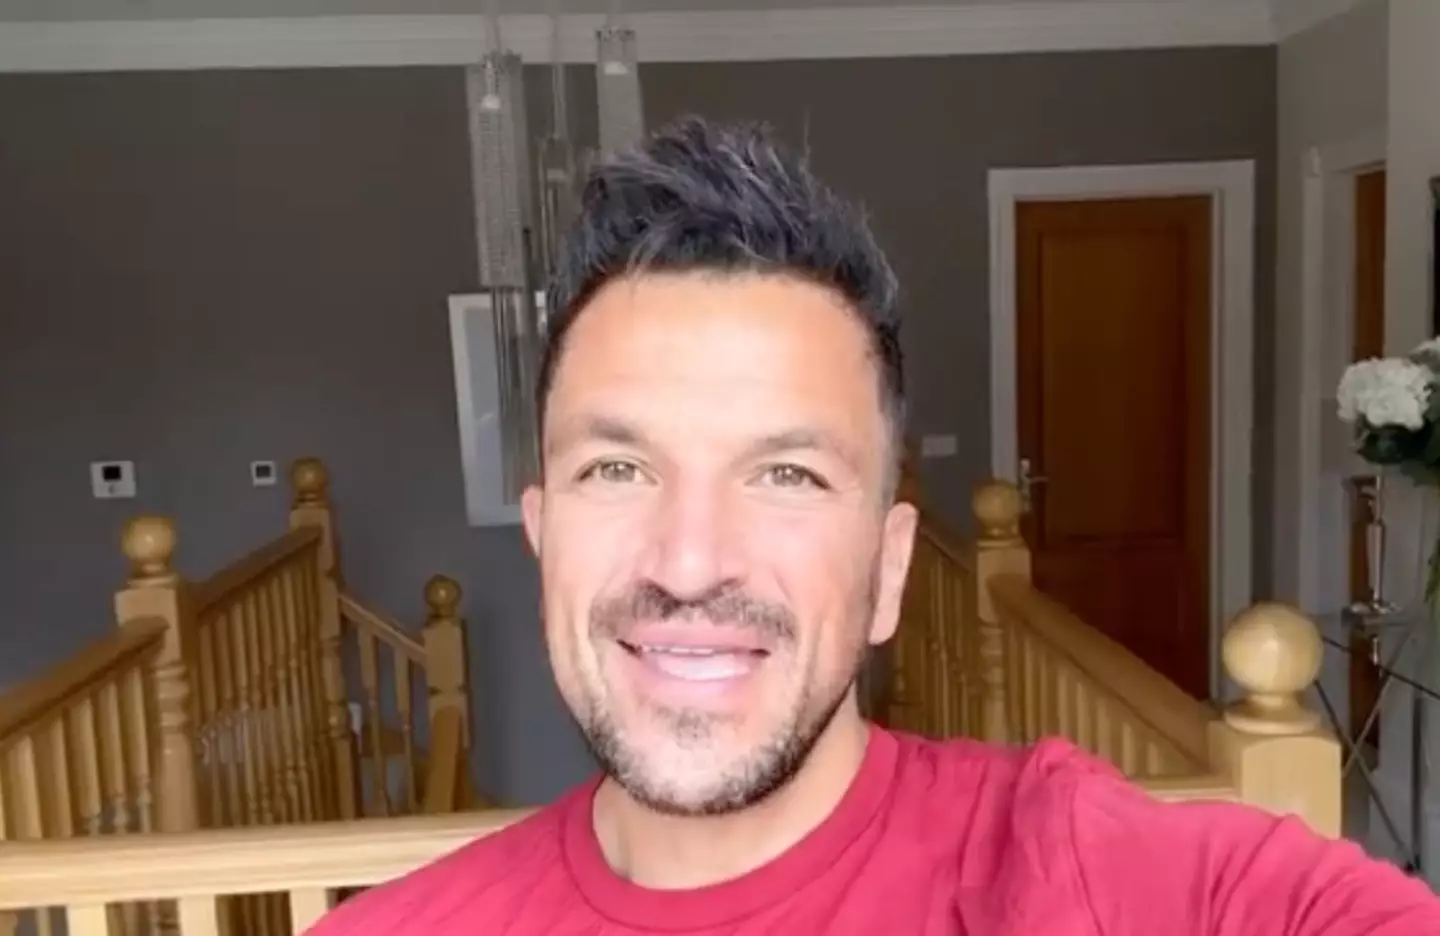 Peter Andre and his wife are said to be 'upset' over the claims in the book.